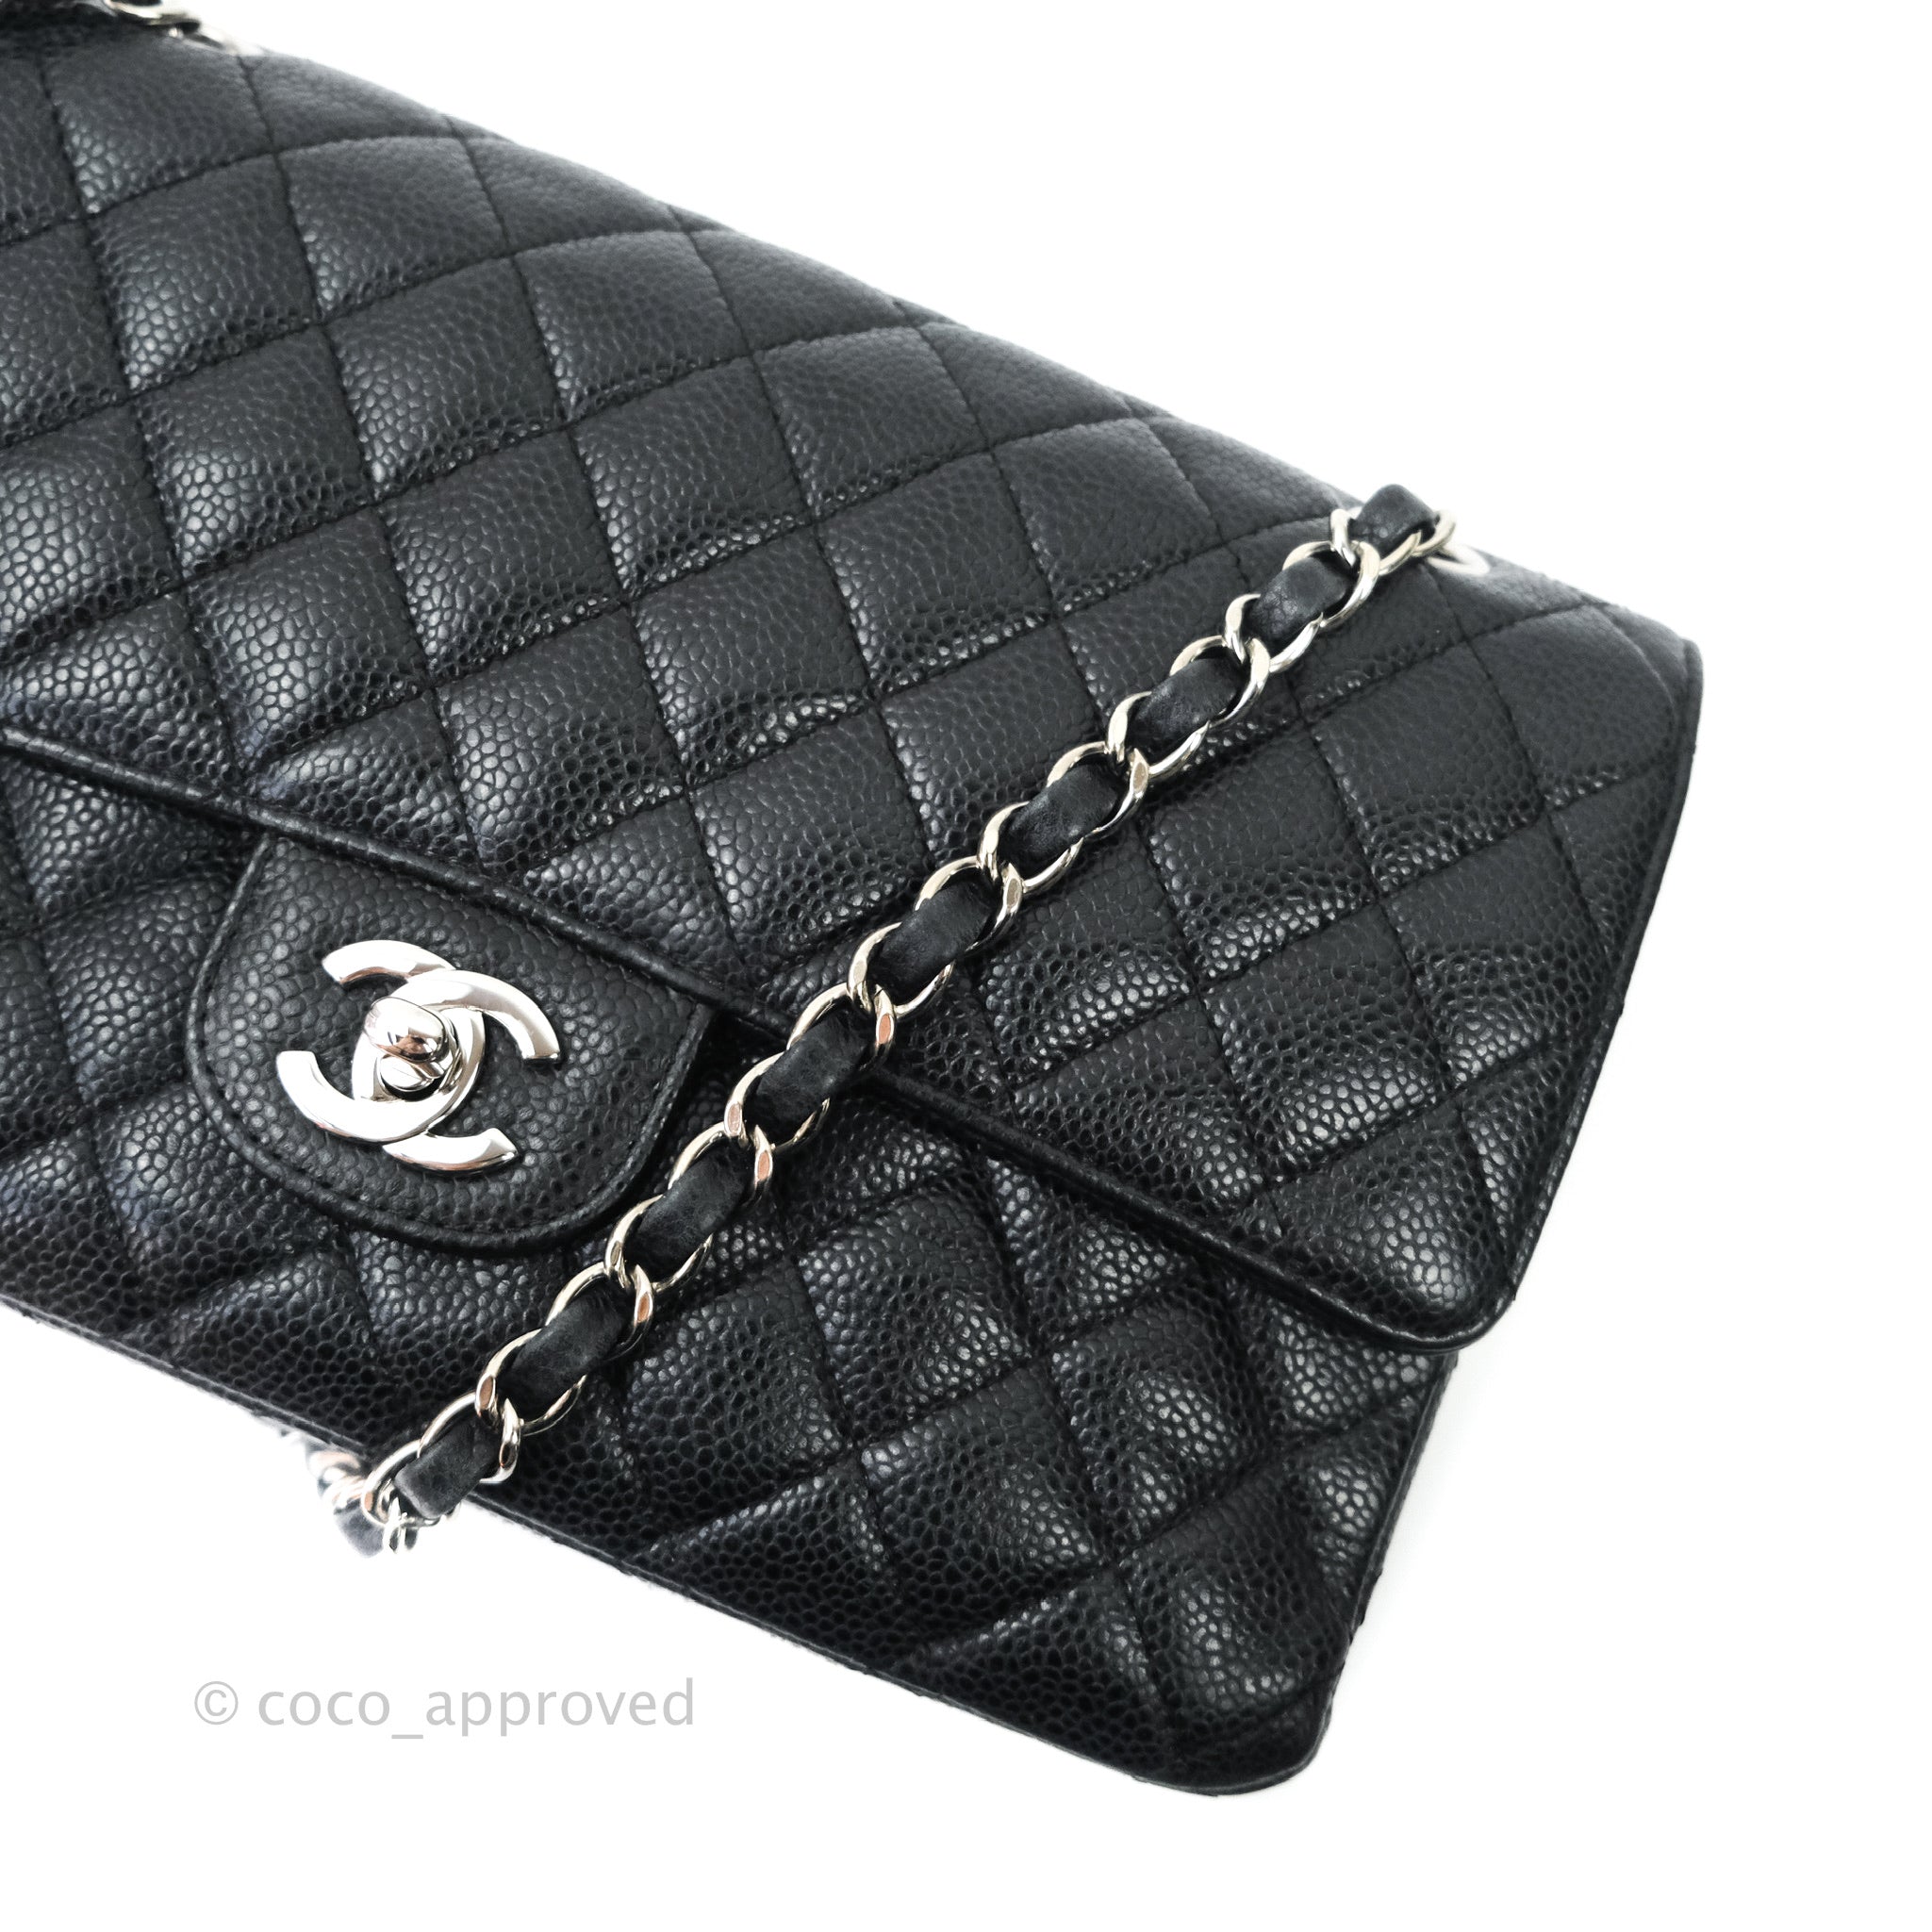 silver and black chanel bag new